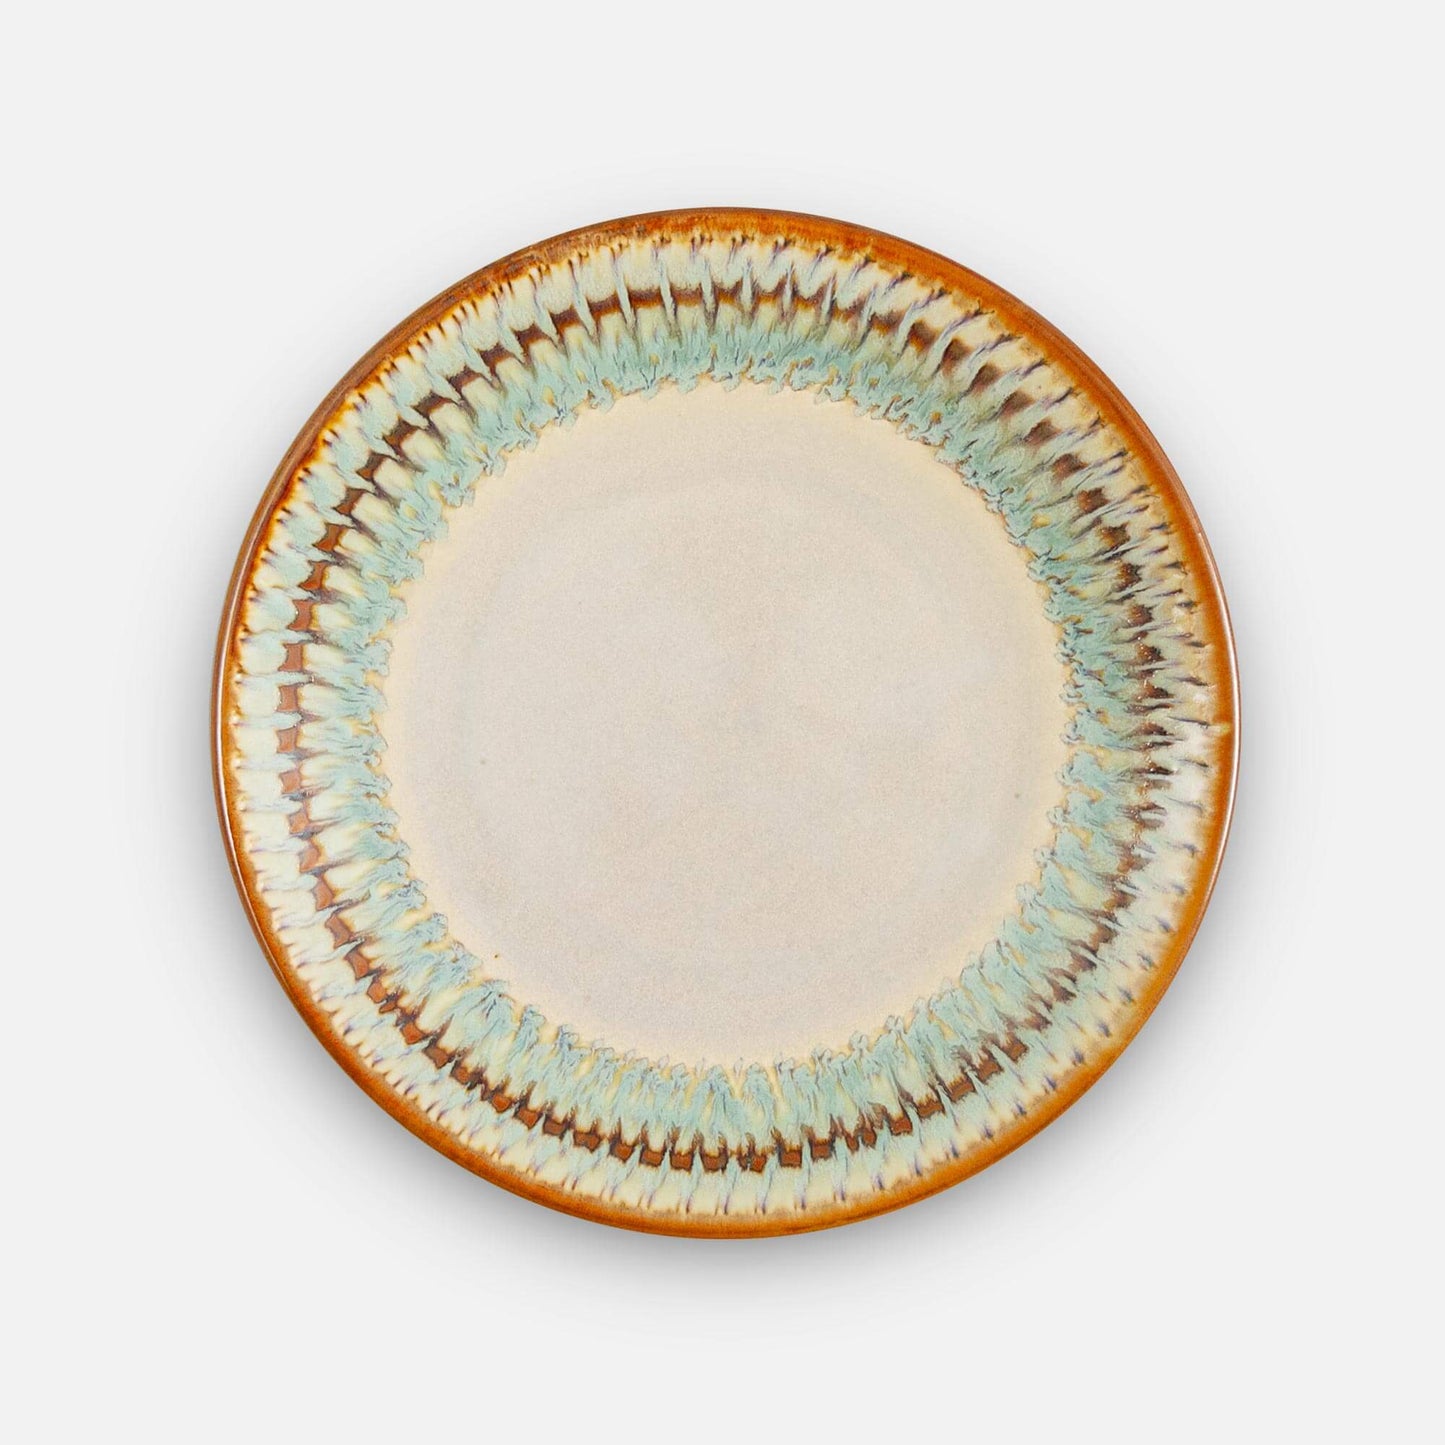 Handmade Pottery Footed Dinner Plate in Ivory & Green pattern made by Georgetown Pottery in Maine